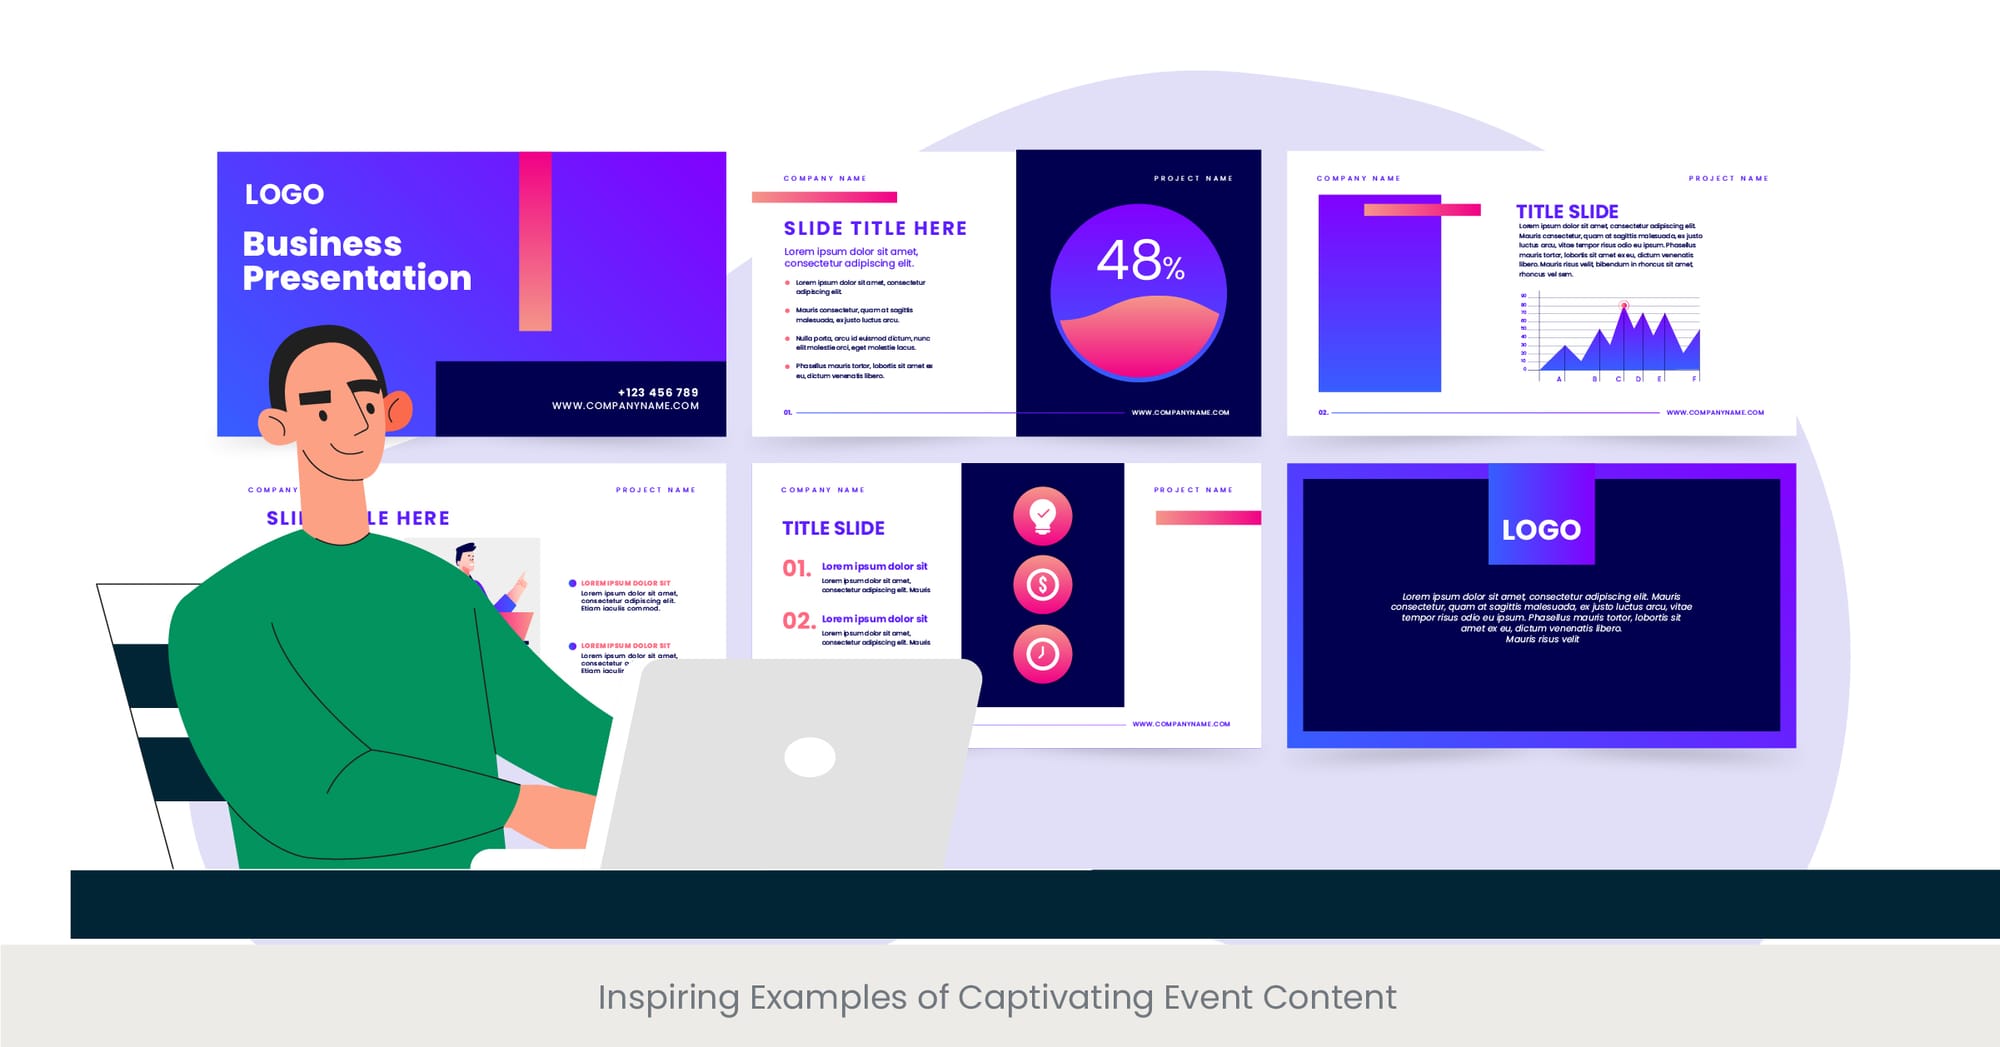 Inspiring Examples of Captivating Event Content